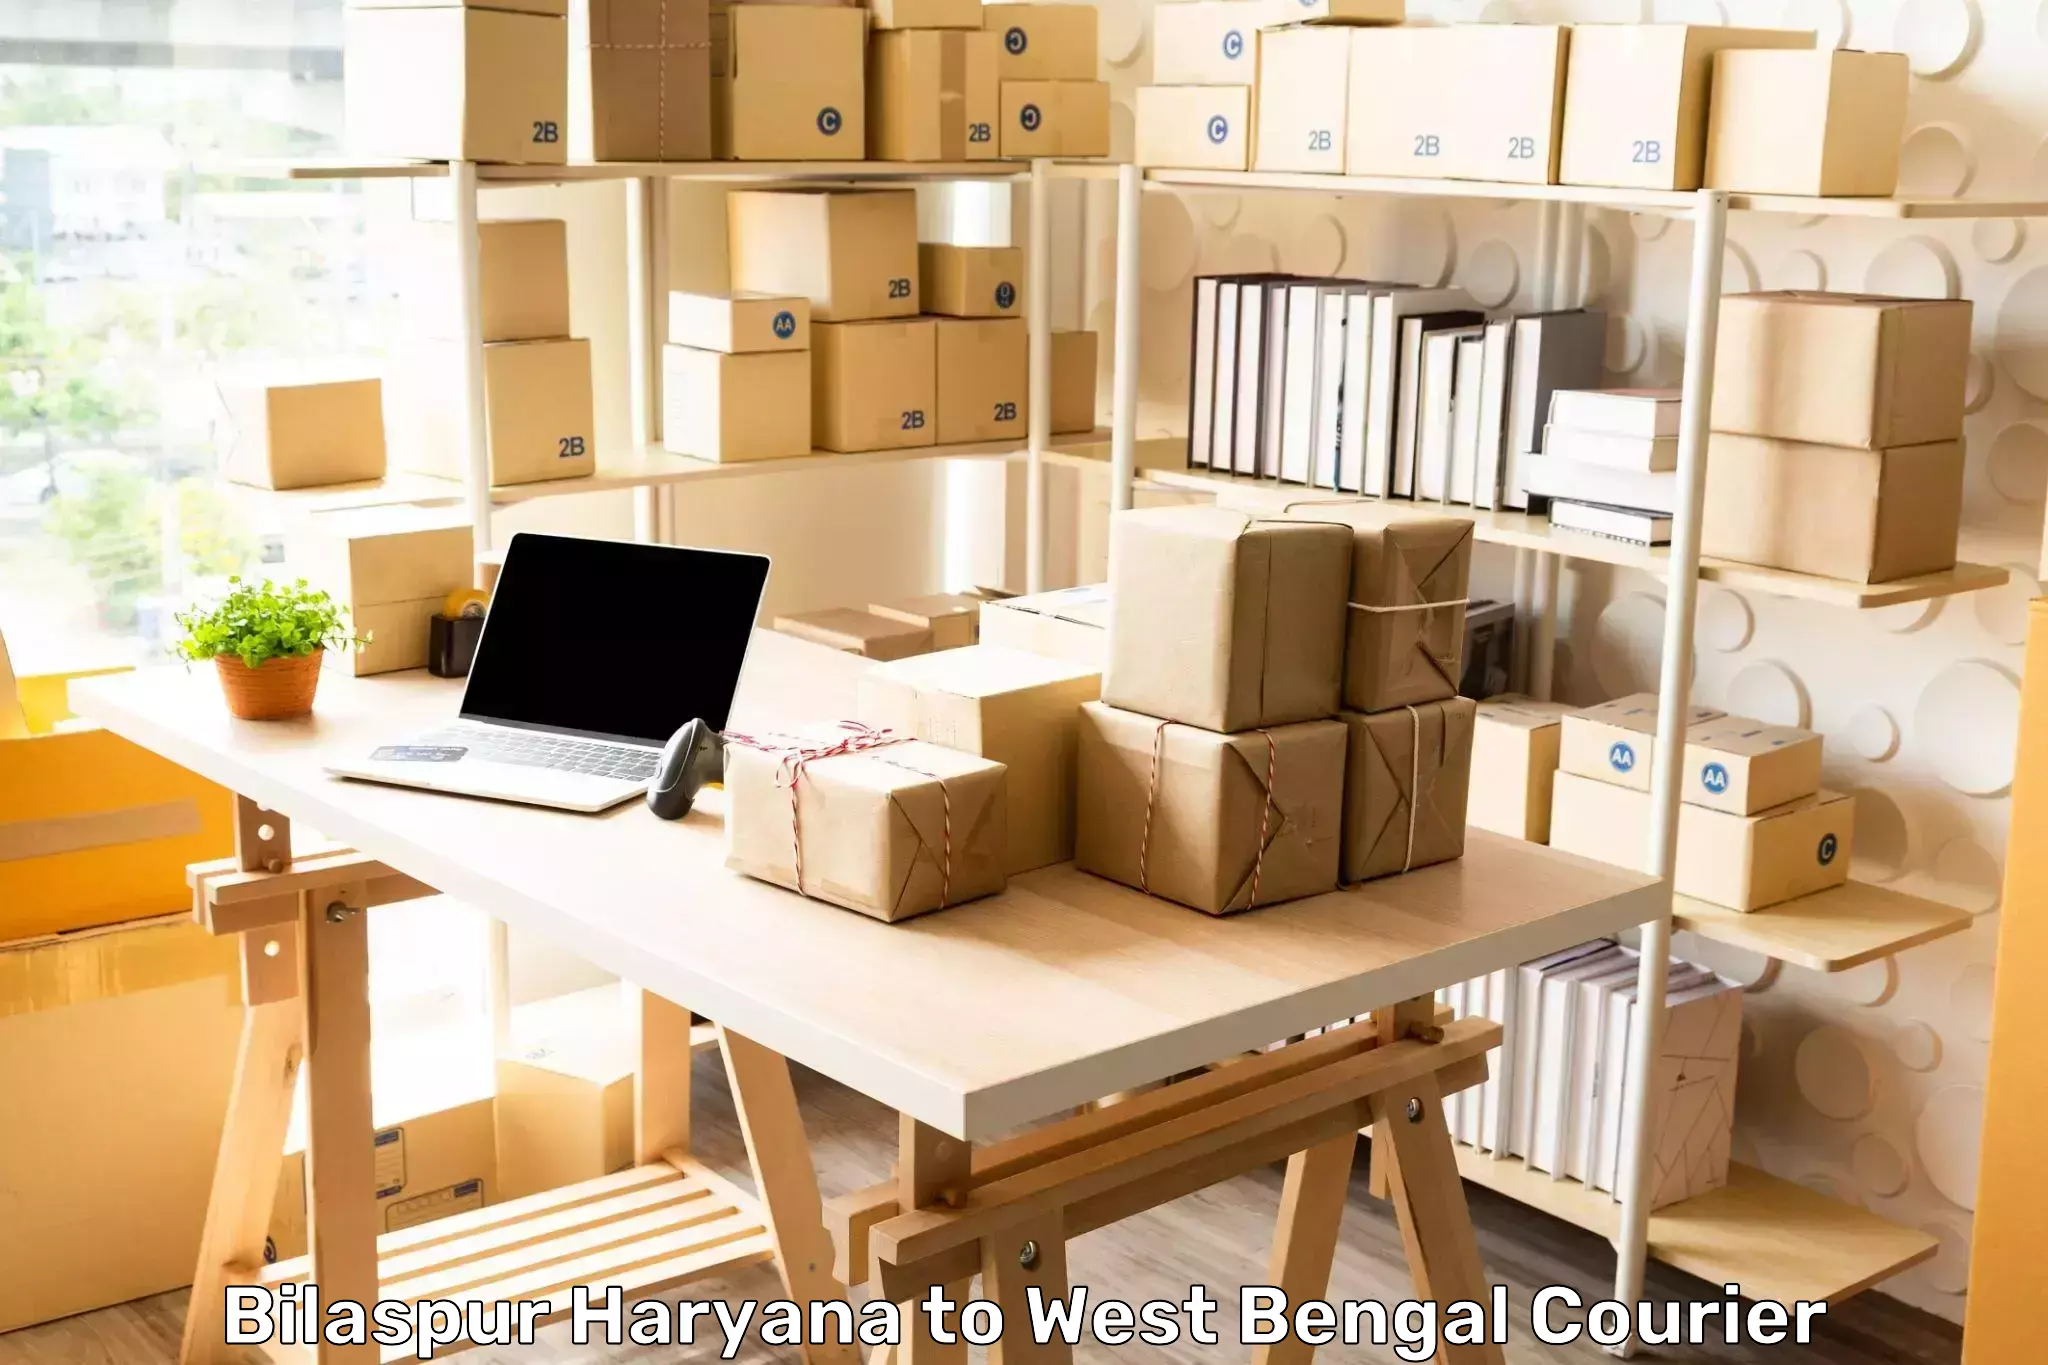 Courier app Bilaspur Haryana to West Bengal